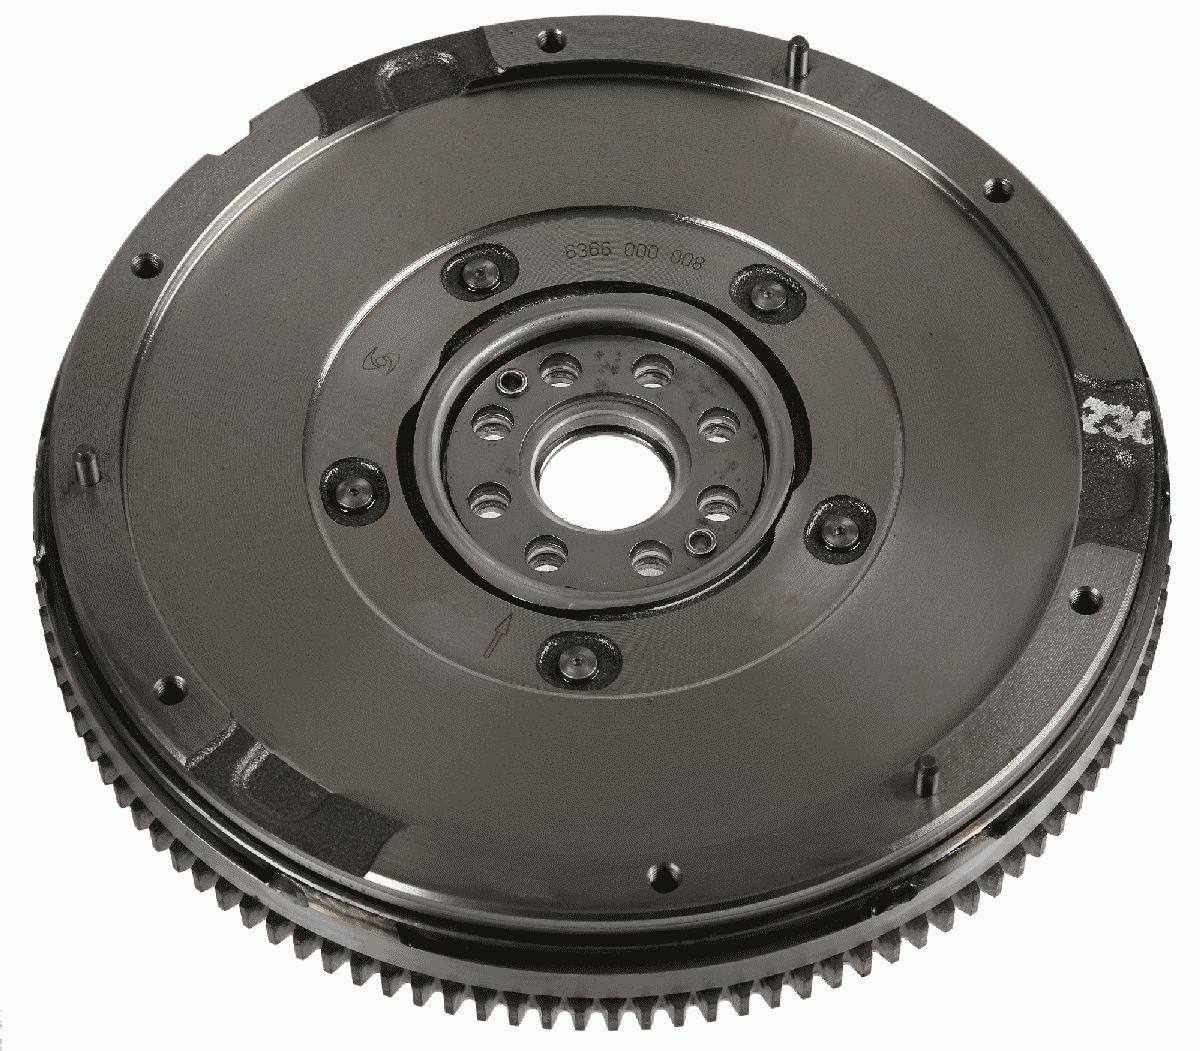 Dual mass flywheel 6366 000 008 Ford FOCUS 2004 – buy replacement parts